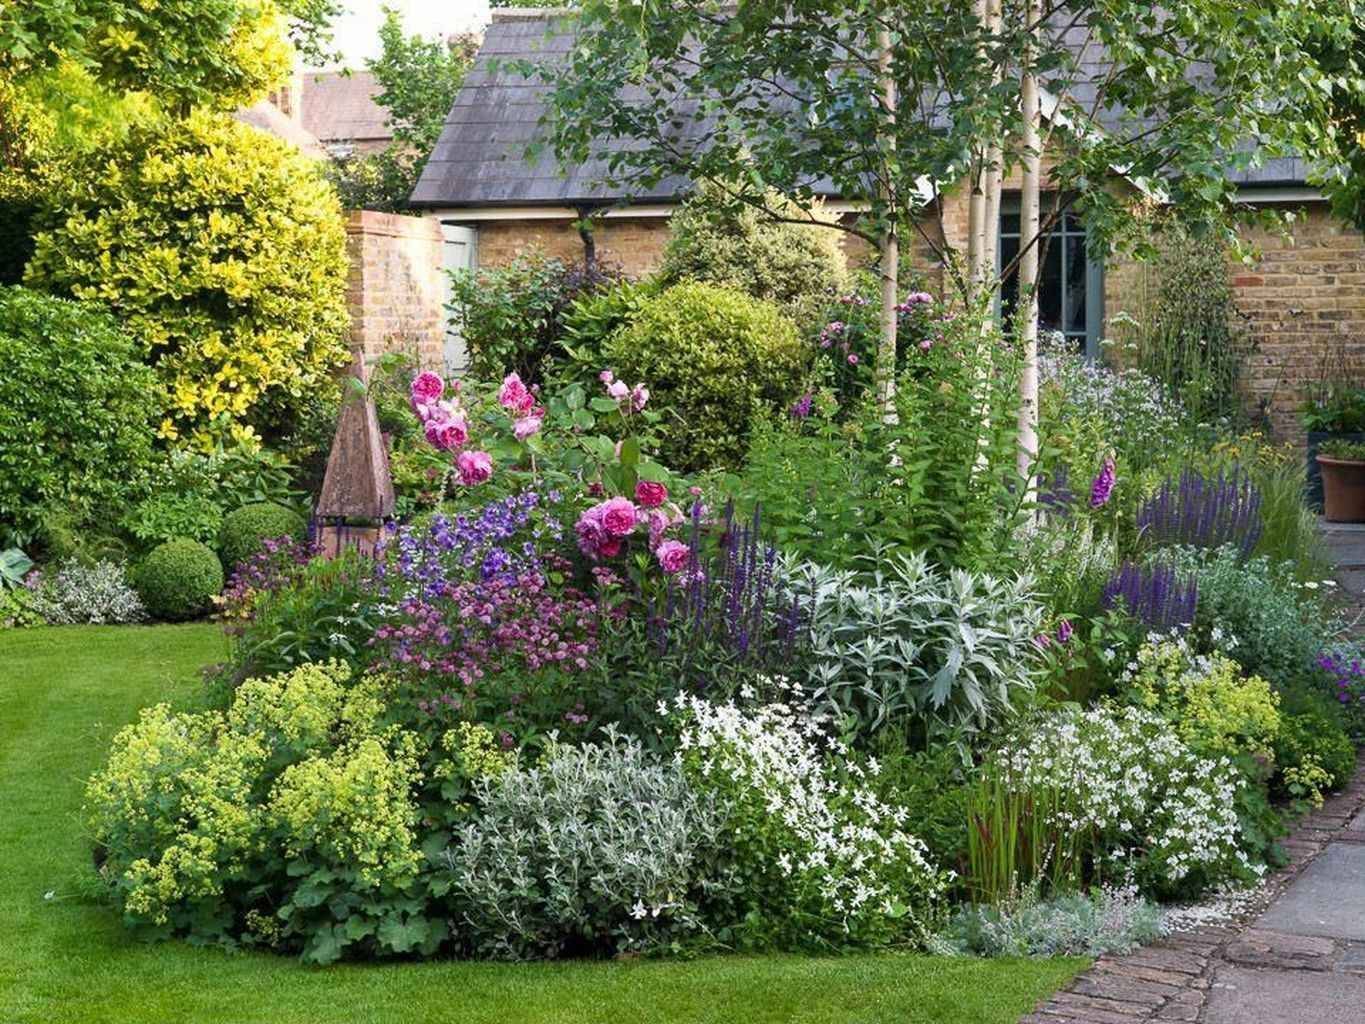 23 Cottage Plants for Small Garden Ideas You Should Check | SharonSable